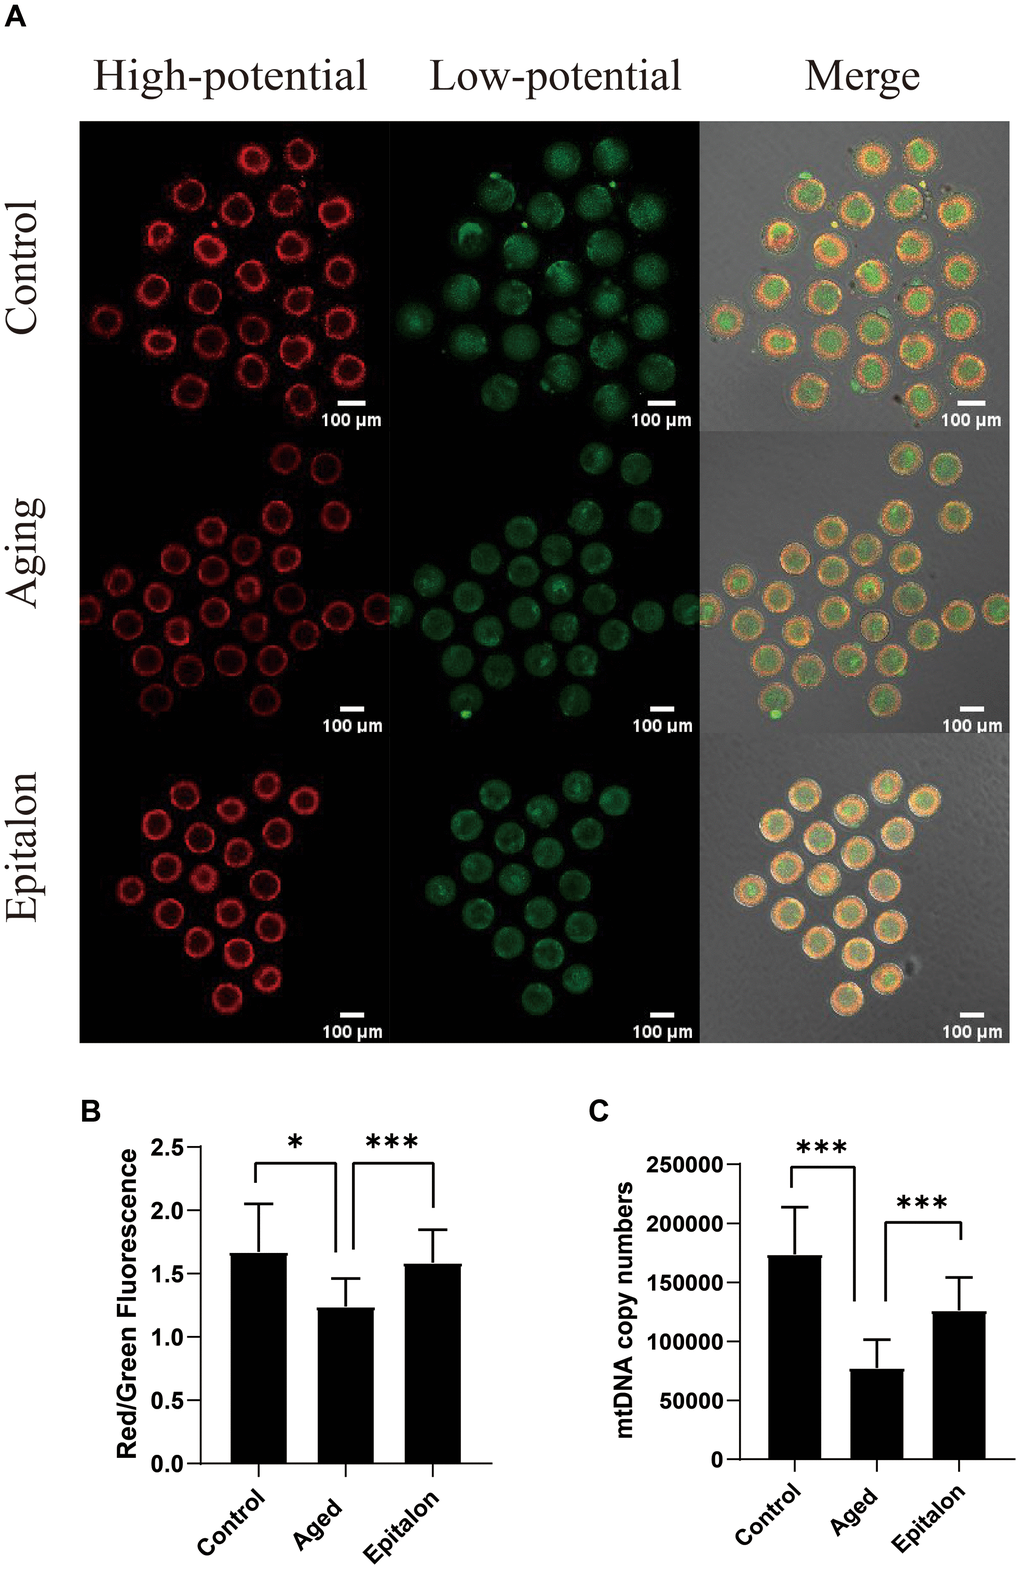 Epitalon protected the function of mitochondria during post-ovulatory oocyte aging in vitro. (A) Distribution of mitochondria with high membrane potential (red) and low membrane potential (green) in three groups of oocytes. (B) The fluorescence intensity of ratio of red/green fluorescence analysis for each oocyte was conducted using Image J software. Significant difference between the Aged and 0.1mM Epitalon-treated groups was observed (p C) mtDNA copy numbers of MII oocytes in all three groups were revealed by real-time polymerase chain reaction analysis. Data from more than 30 oocytes were analyzed for each group. Significant difference between the Aged and 0.1mM Epitalon-treated groups was observed (p 